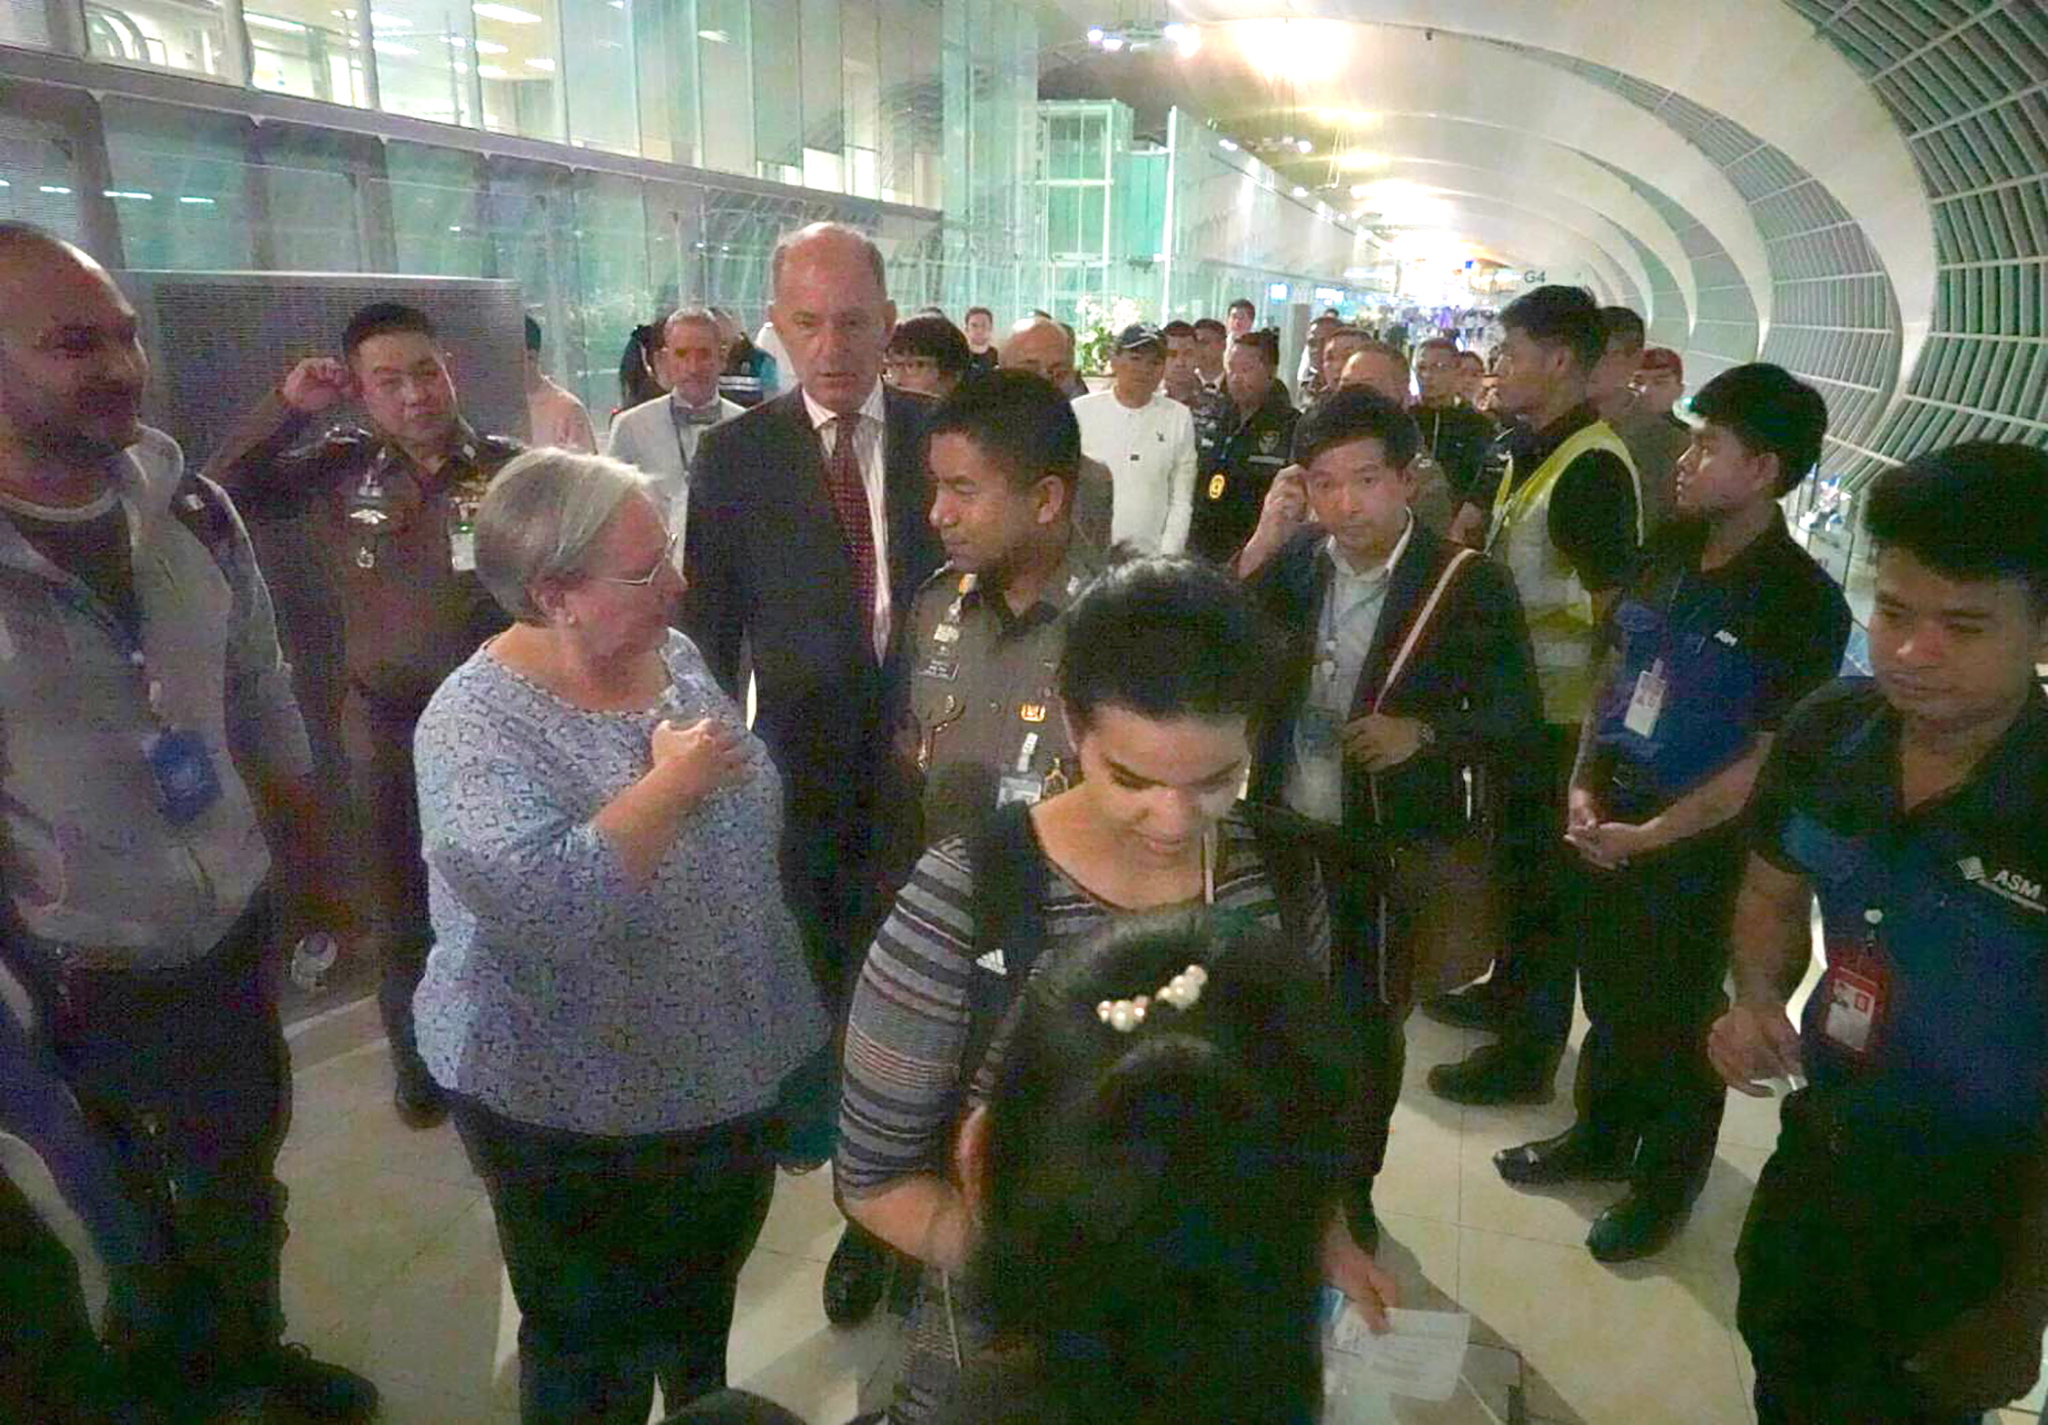 epa07276492 A handout photo made available by the Royal Thai Police shows Saudi Arabian woman seeking asylum Rahaf Mohammed al-Qunun (front) being accompanied by Thai Immigration Police Chief Surachate Hakparn (back, C) and unidentified foreign officials to board a flight departing Suvarnabhumi Airport in Samut Prakan province, on the outskirts of Bangkok, Thailand, 11 January 2019 (issued 12 January 2019). An 18-year-old runaway Saudi teen Rahaf Mohammed al-Qunun, who fled her family, has left Thailand en route to Toronto after she was granted asylum status in Canada, Thai Immigration officials said.  EPA/ROYAL THAI POLICE / HANDOUT BEST QUALITY AVAILABLE HANDOUT EDITORIAL USE ONLY/NO SALES